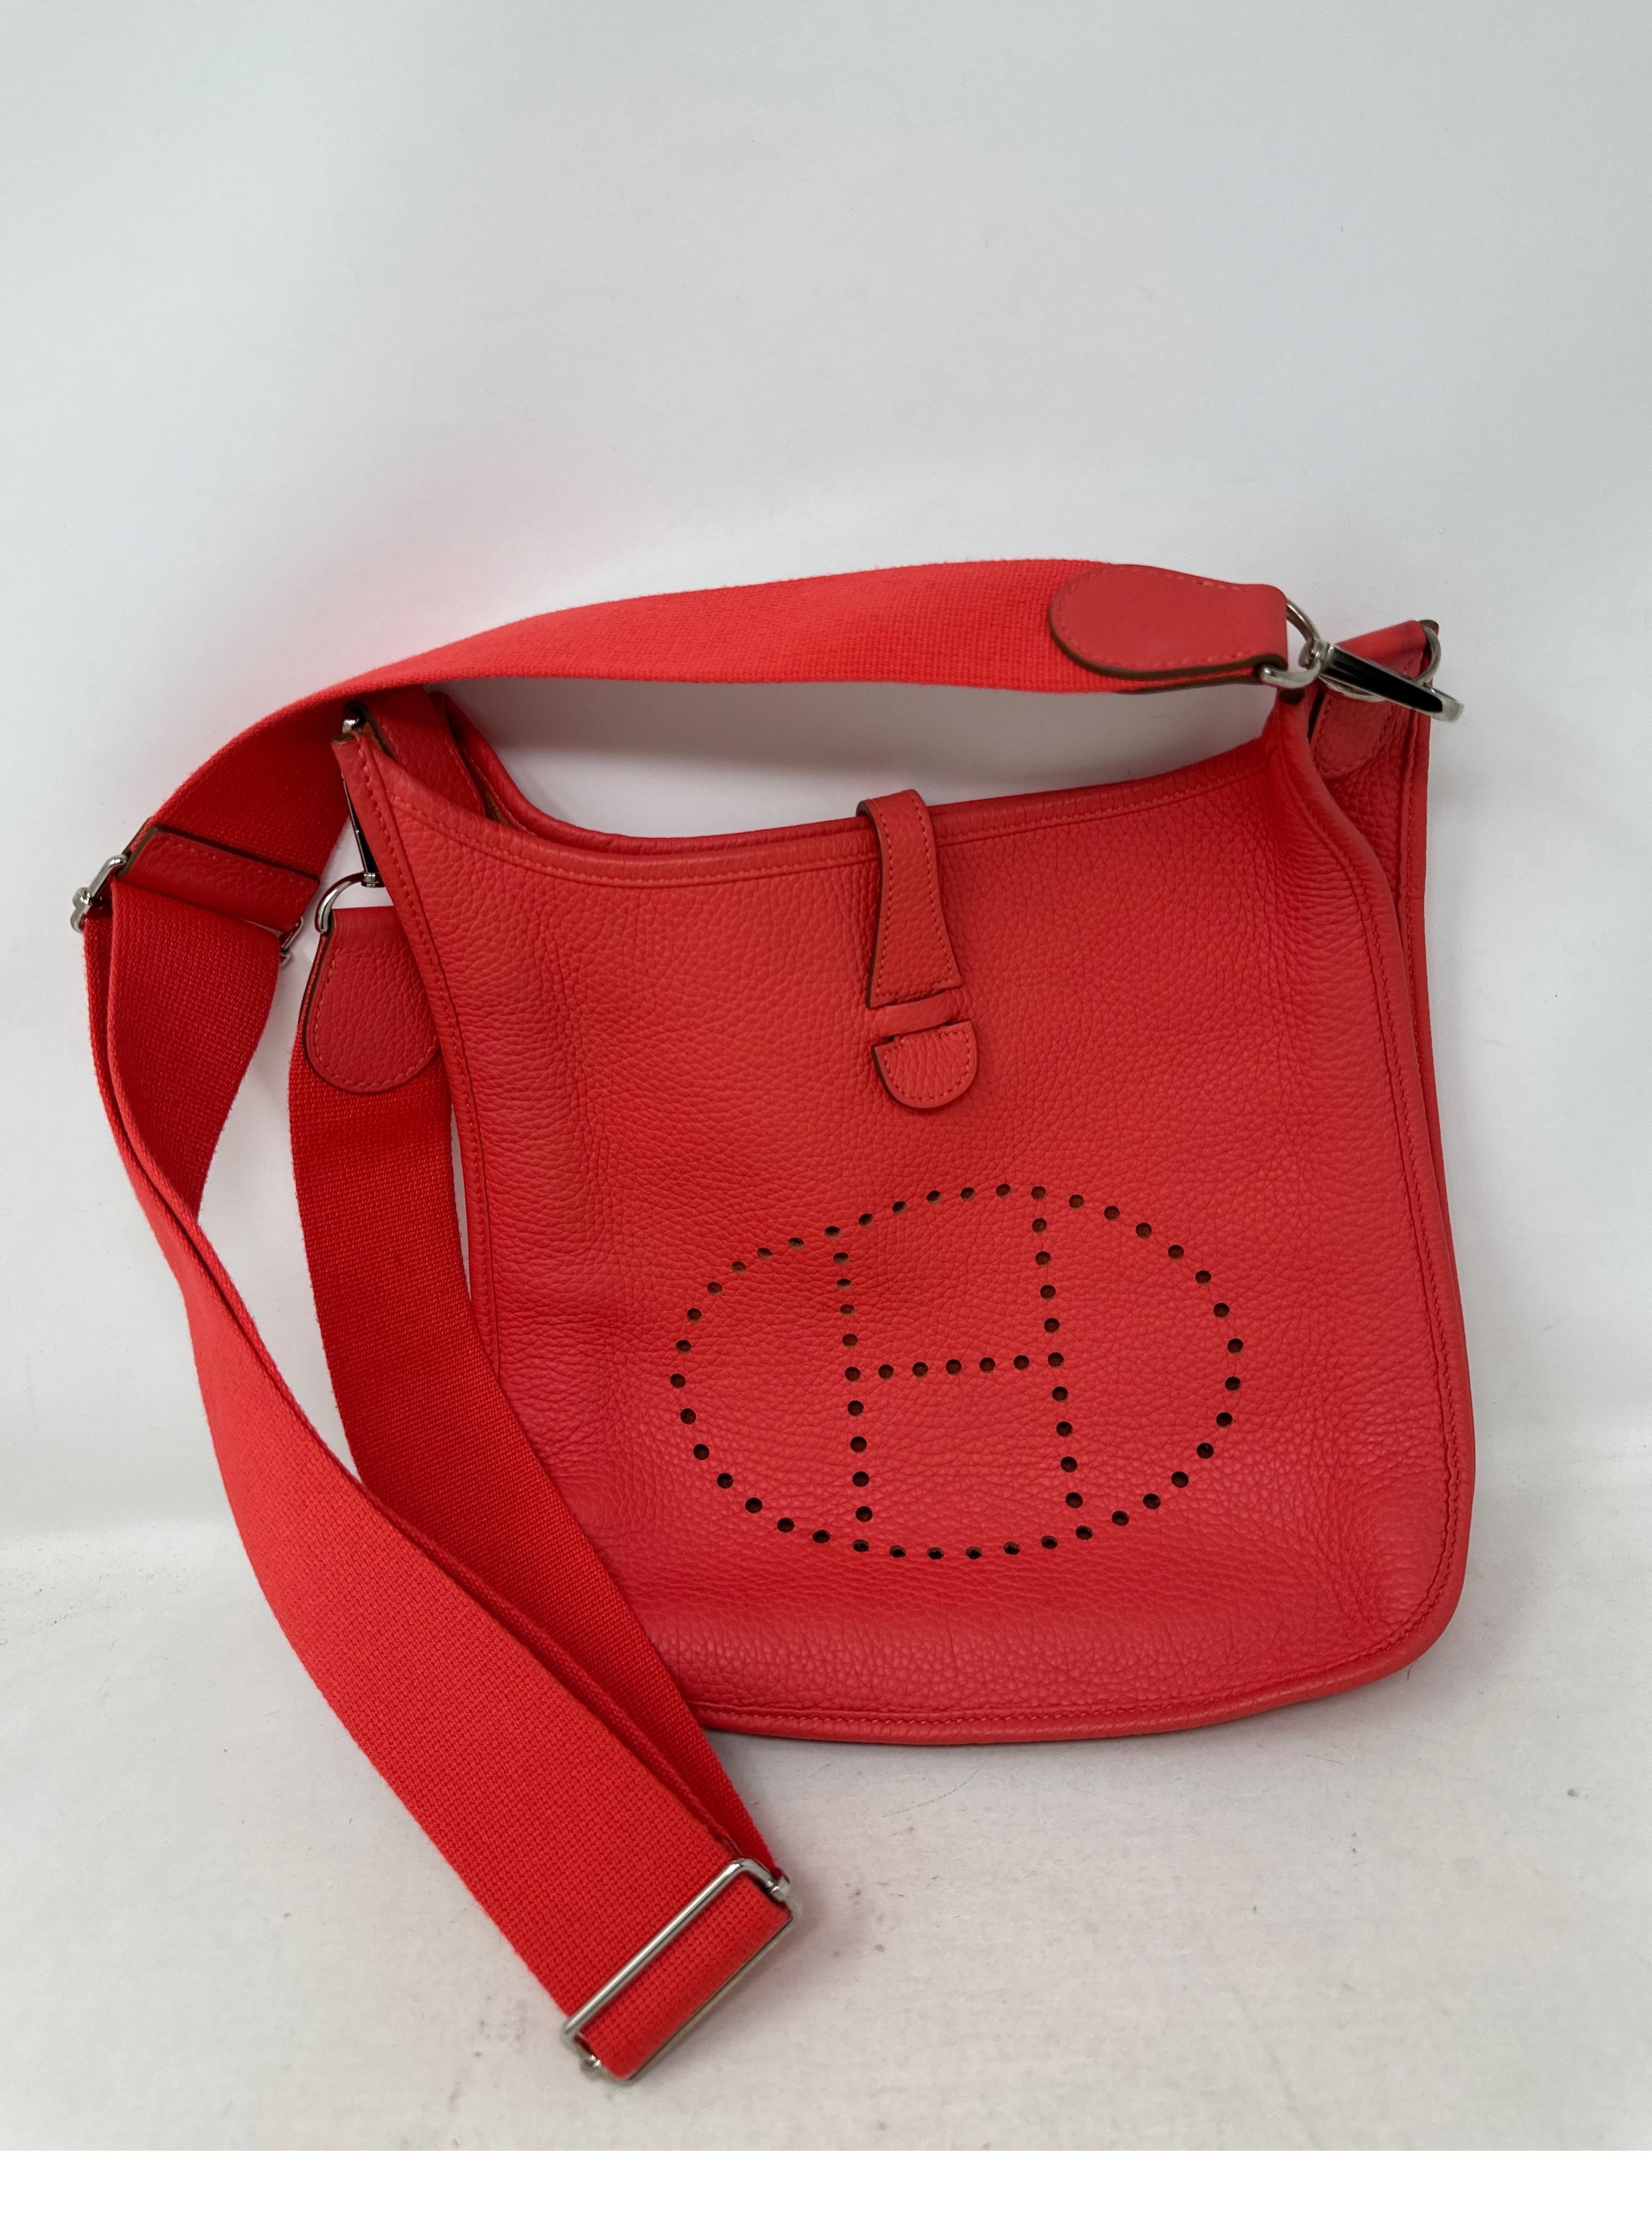 Hermes Rouge Pivoine Evelyne PM Bag. Excellent condition. Beautiful rosy pink/ coral salmon color. Clemence leather. Great crossbody bag. Has adjustable strap. Silver hardware. Interior clean. Includes dust bag. Guaranteed authentic. 